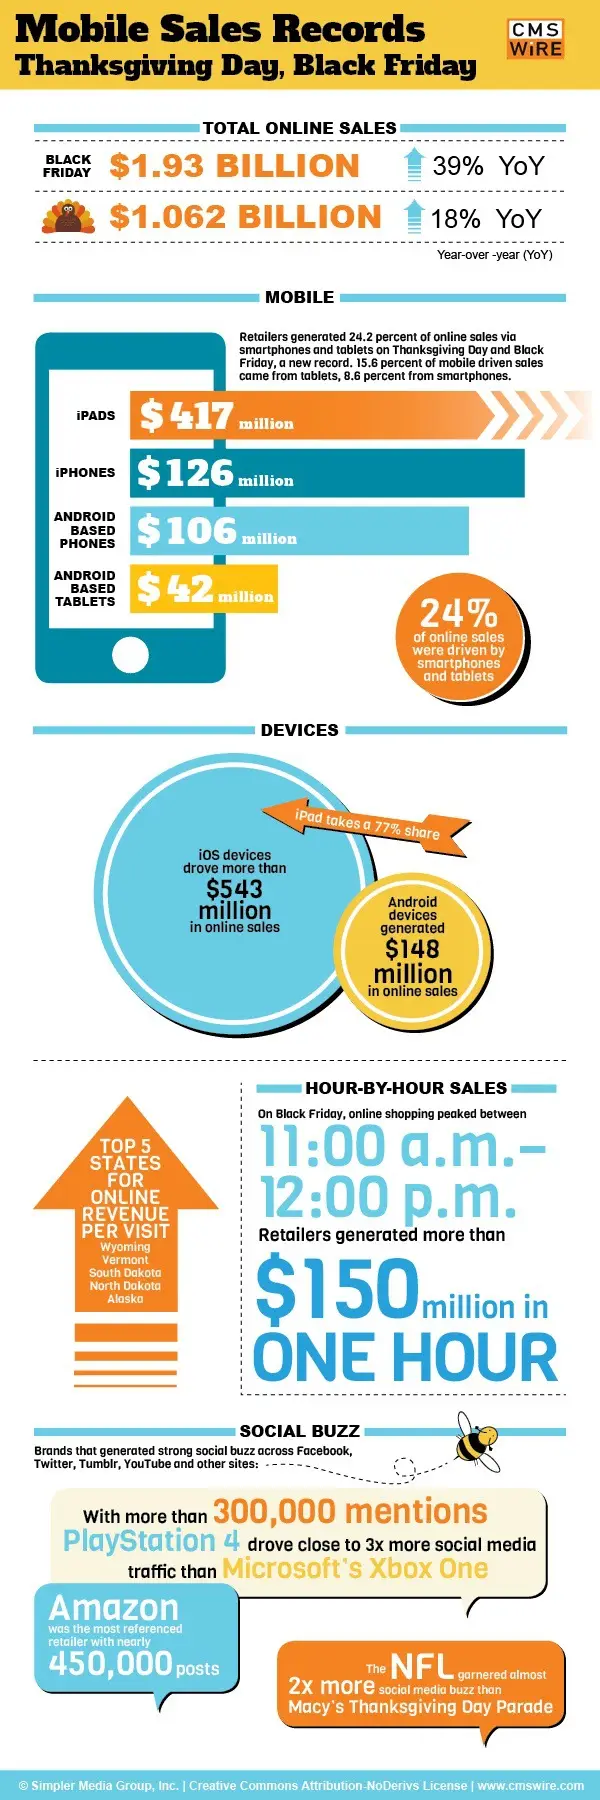 Mobile Sales Records On Thanksgiving Day And Black Friday 2013
